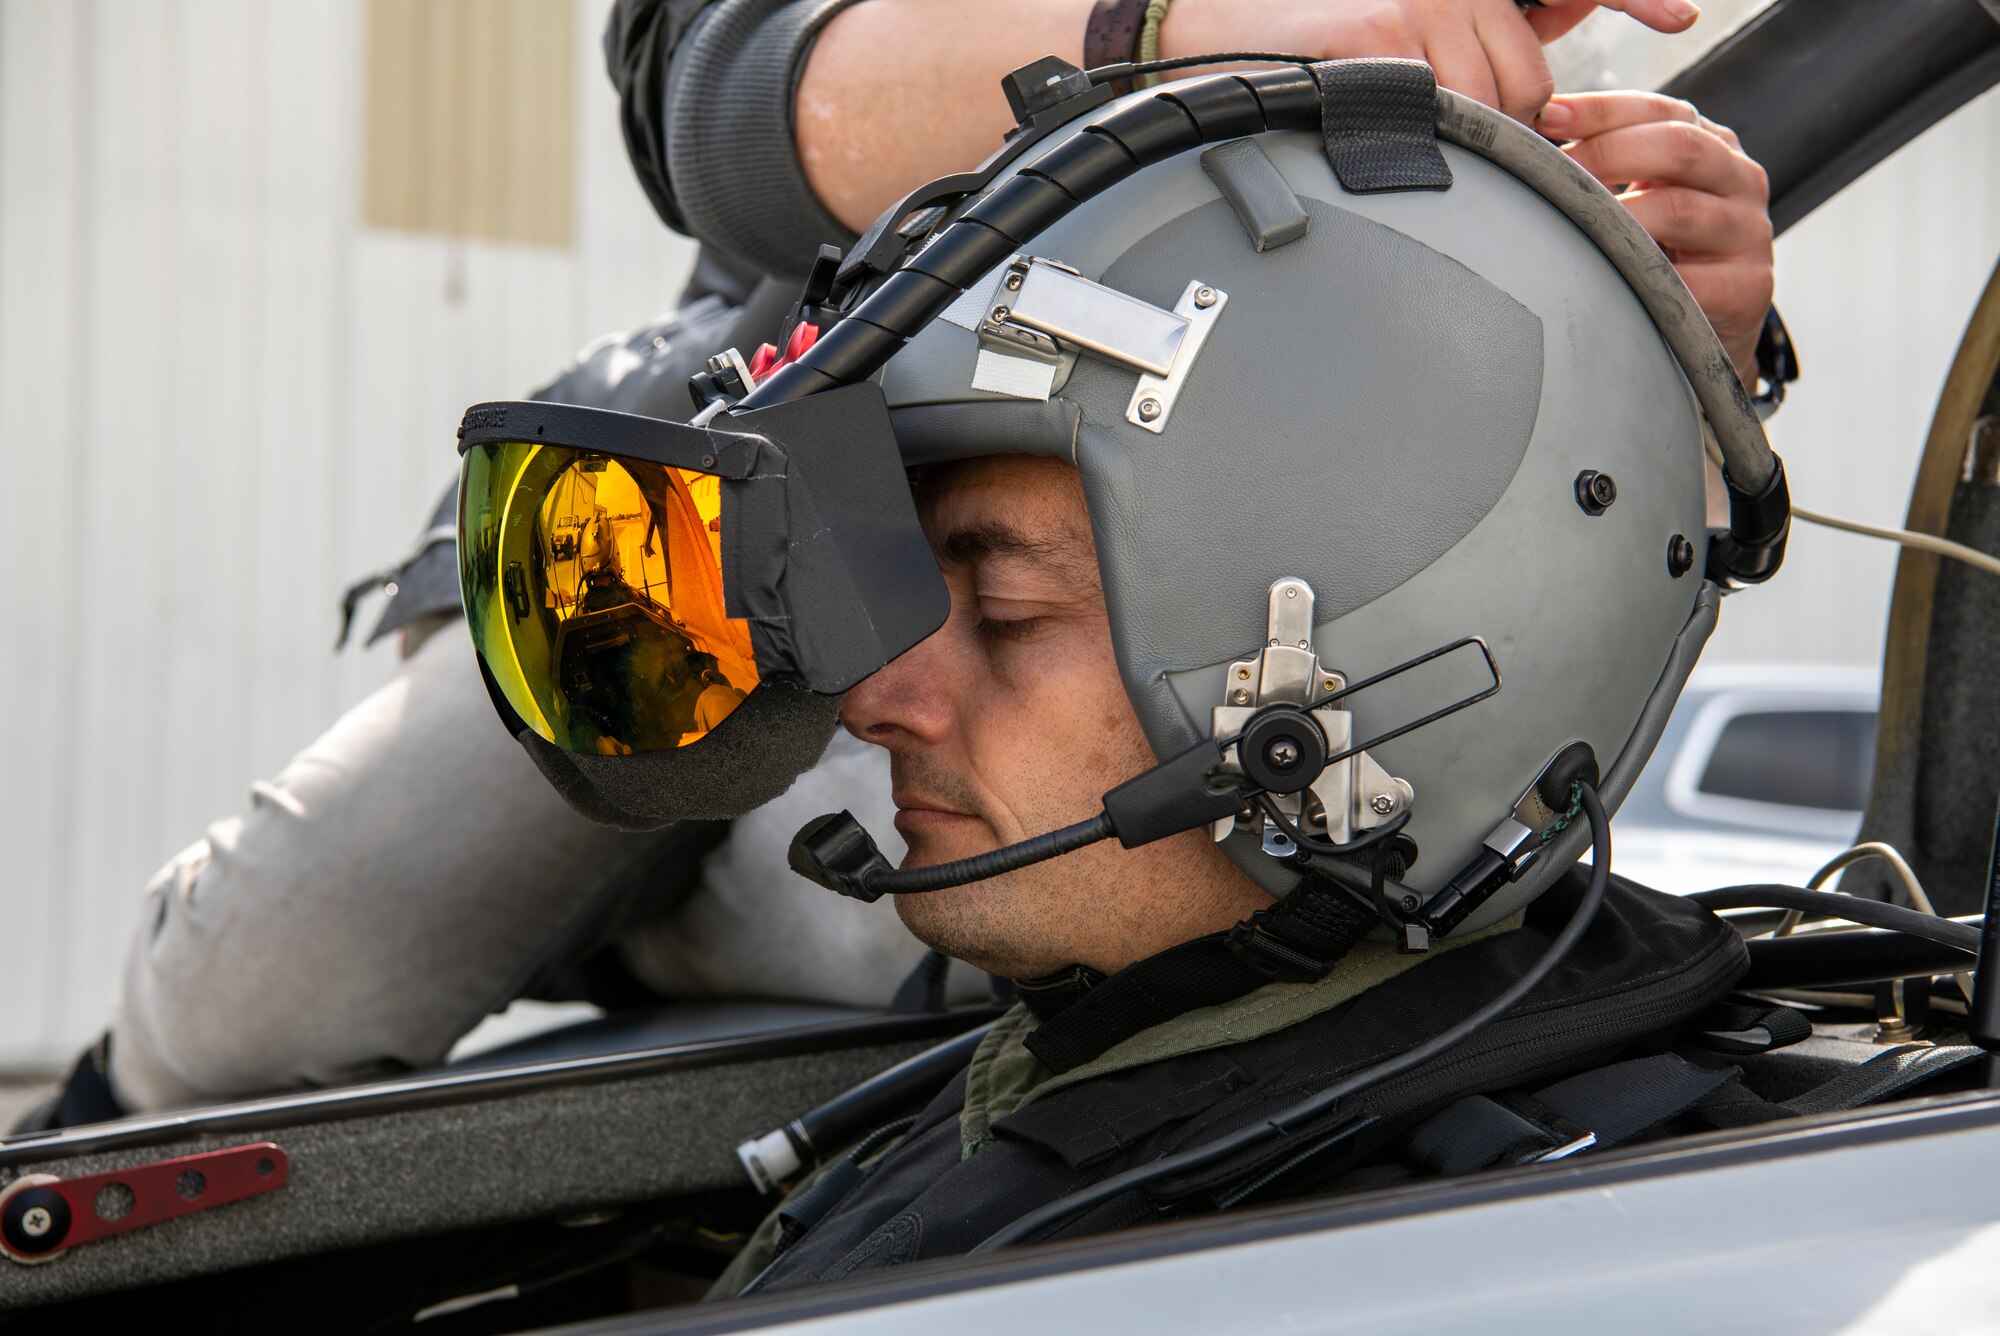 U.S. Air Force Maj. Scott Thorup, Air Combat Command Training Support Squadron Detachment 14 commander, prepares for takeoff as Rina Shkrabova, Red 6 director of hardware design, connects the augmented reality headset to the Berkut in Santa Monica, Calif., April 13, 2021.